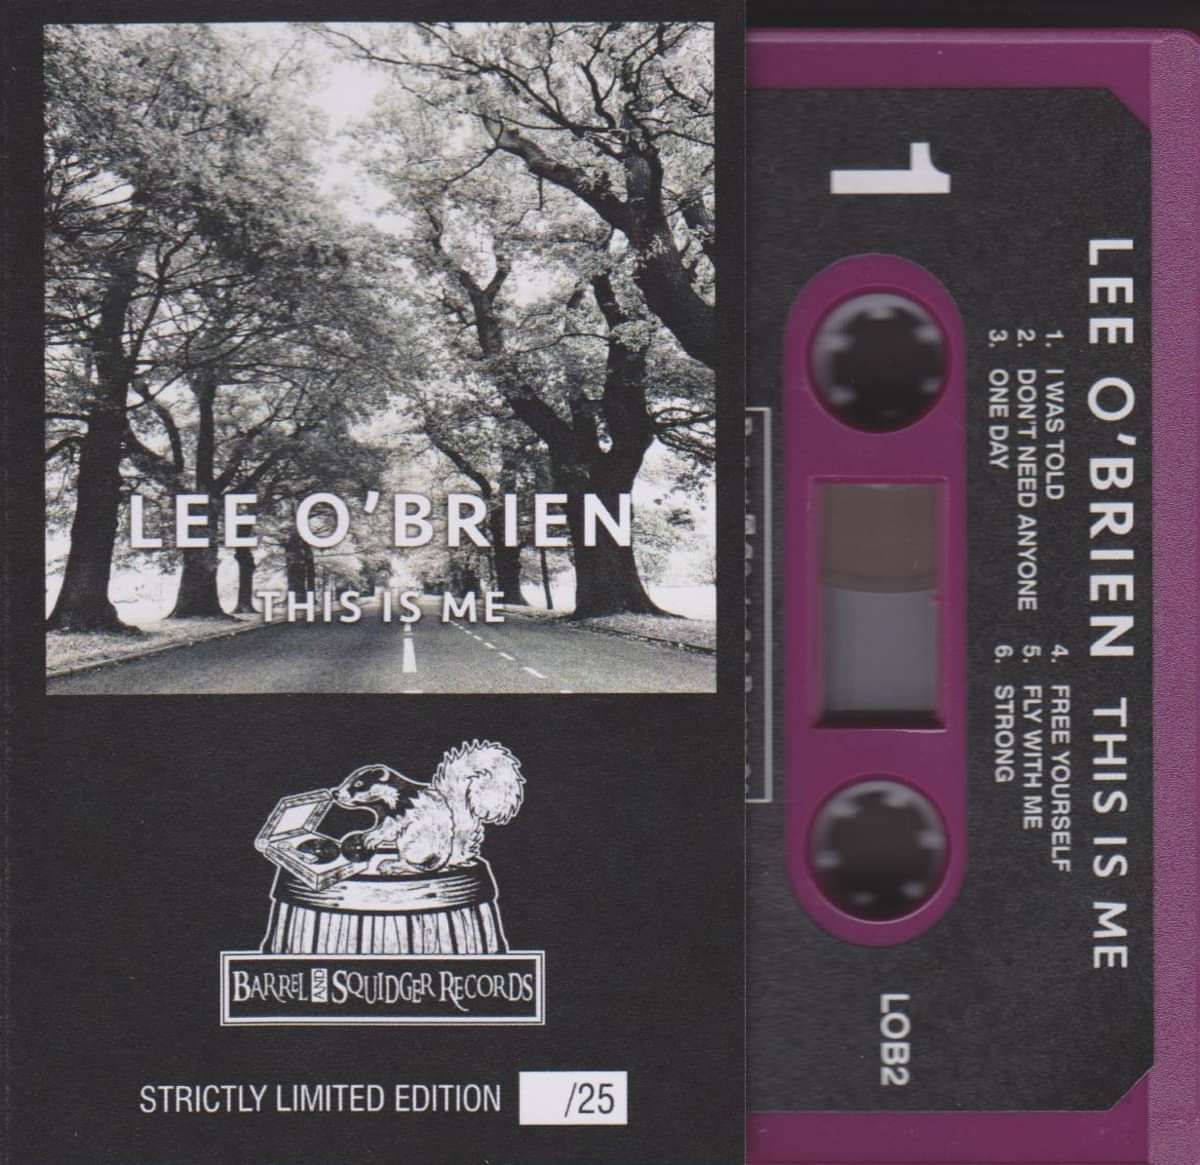 Lee O'Brien - This Is Me - Claret Cassette [Recorded with Status Quo's Francis Rossi] - Barrel And Squidger Records